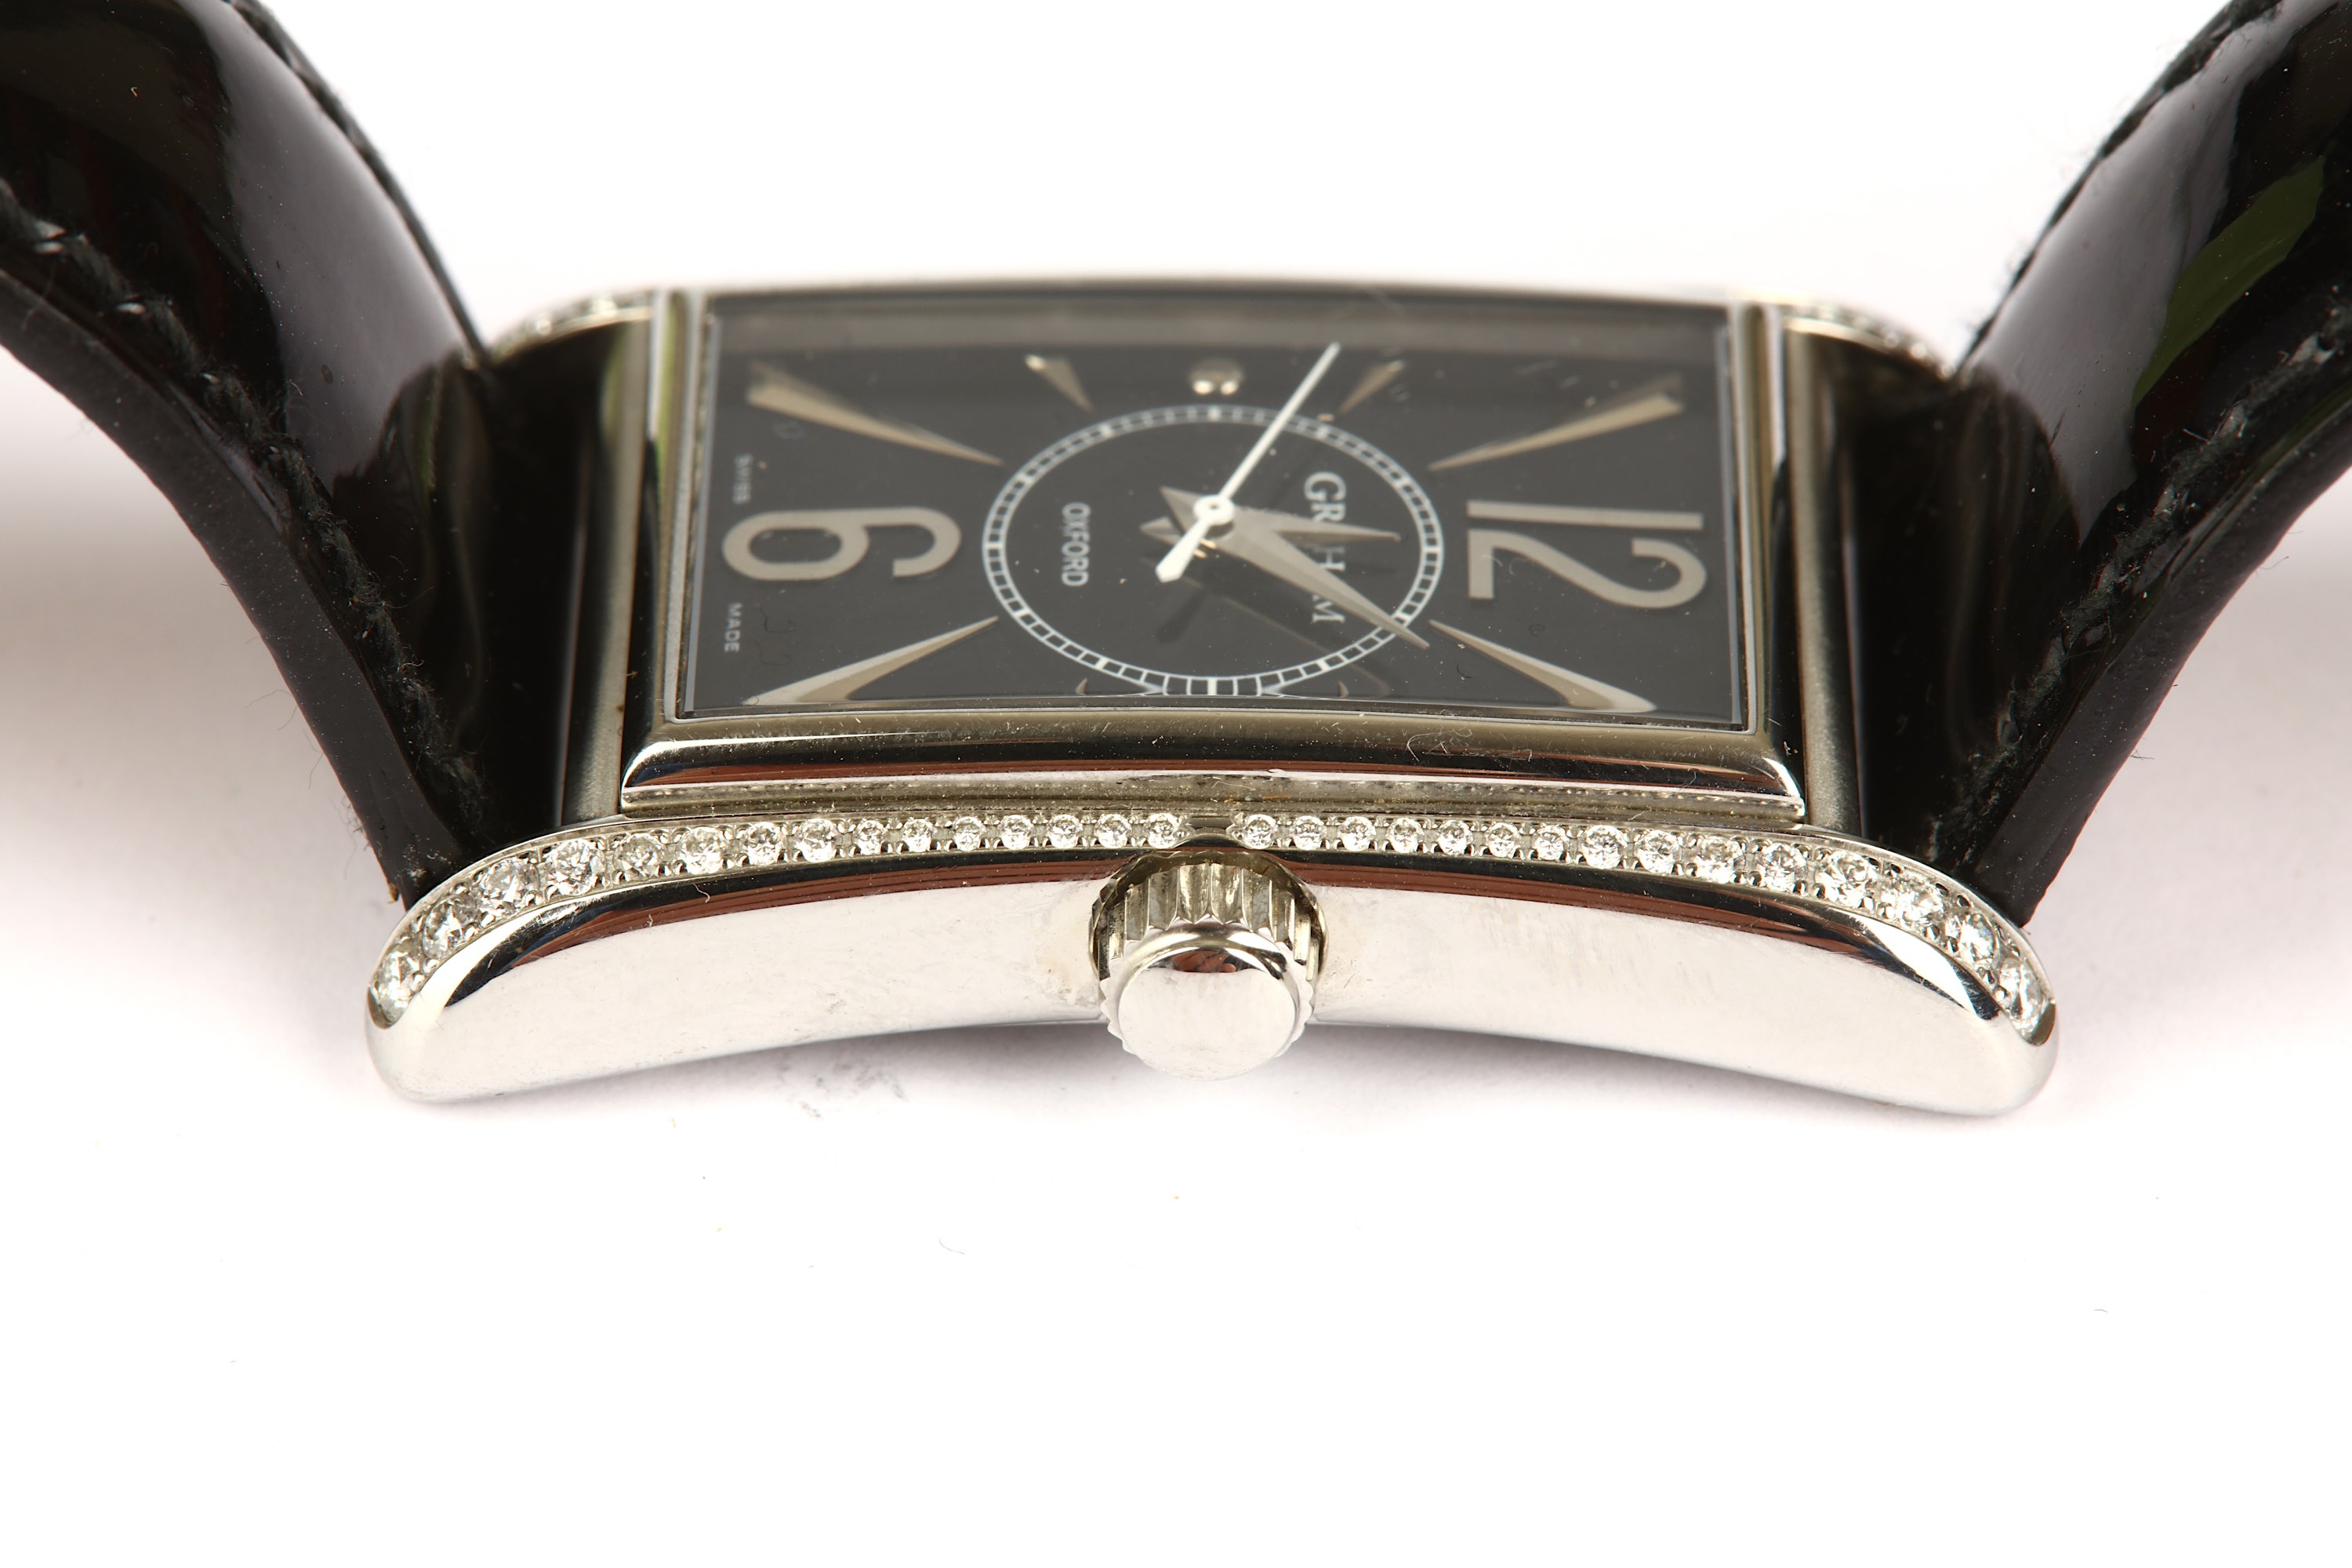 GRAHAM. A STAINLESS STEEL AND DIAMOND SET AUTOMATIC WRISTWATCH. Maker: Graham. Model: Oxford. - Image 12 of 14